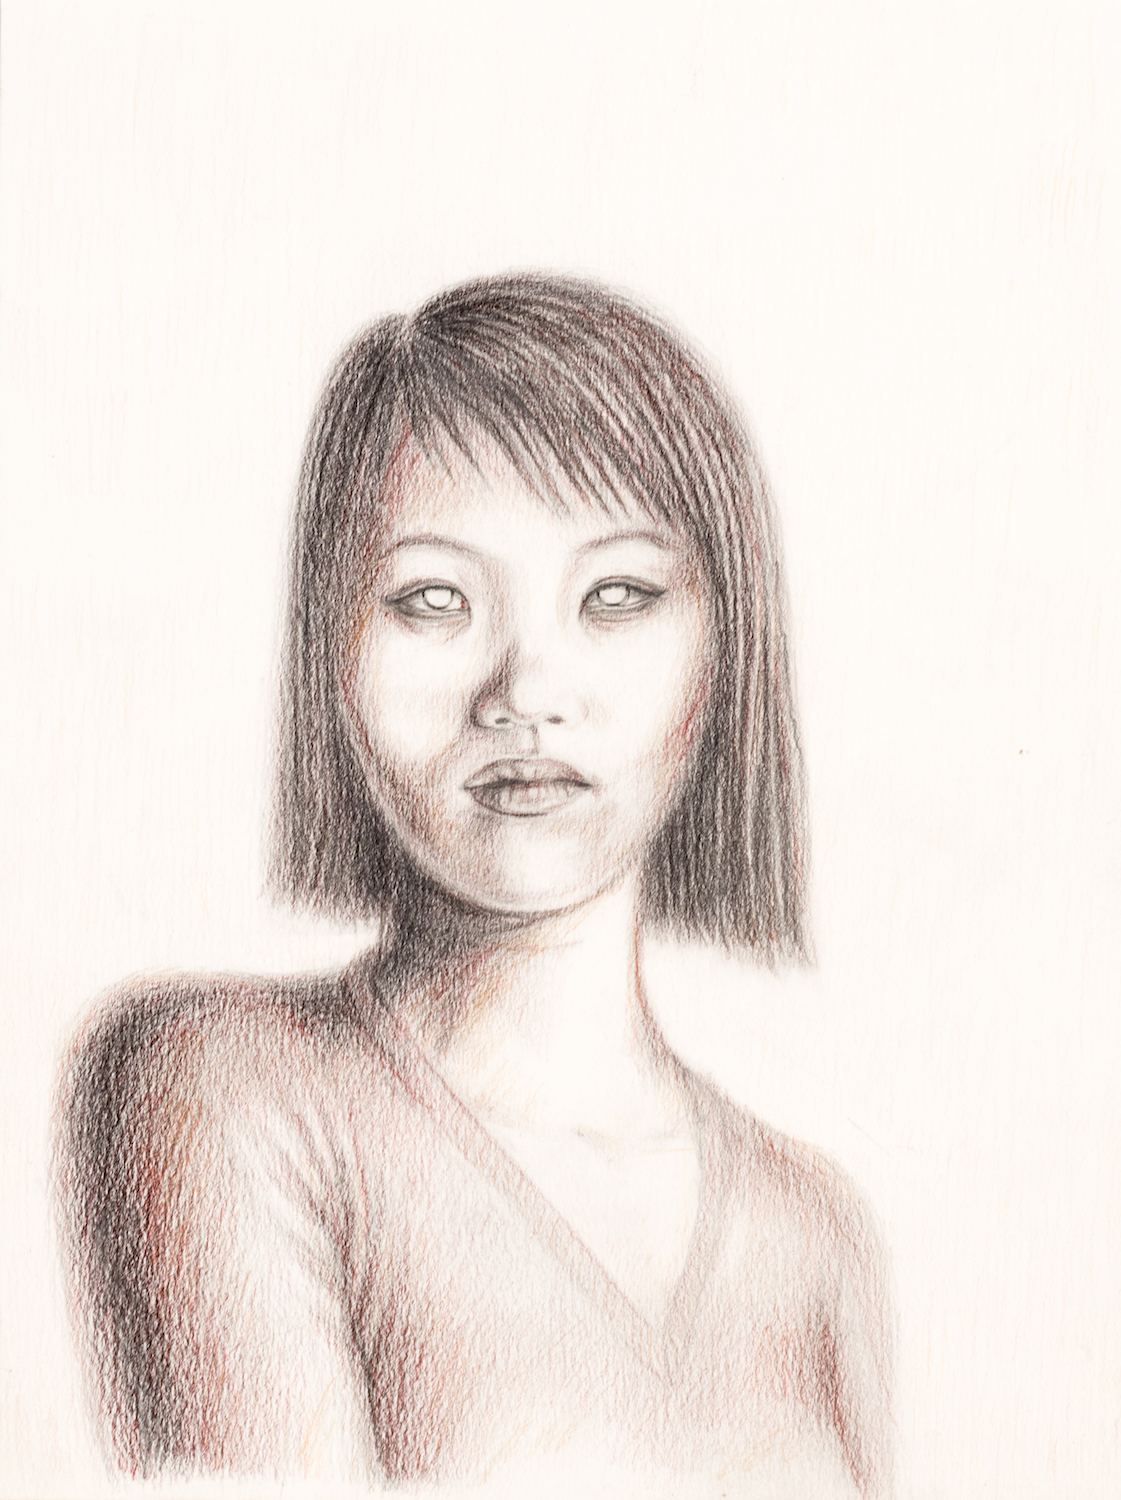 G.B. Jones, *Evelyn Lau*, 2004. Graphite and colored pencil on paper